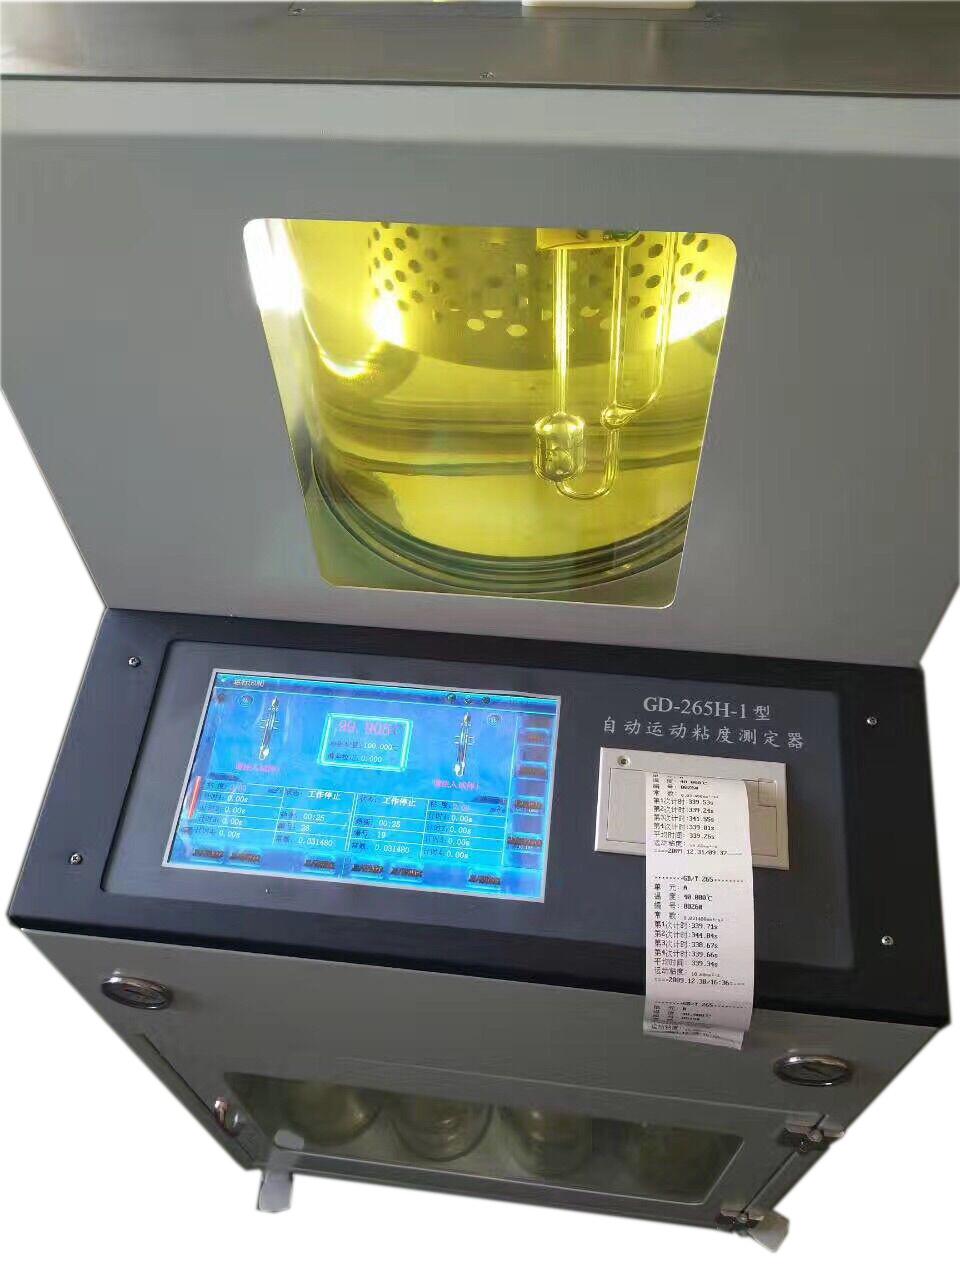 ASTM D445 Automatic Kinematic Viscosity Test Equipment